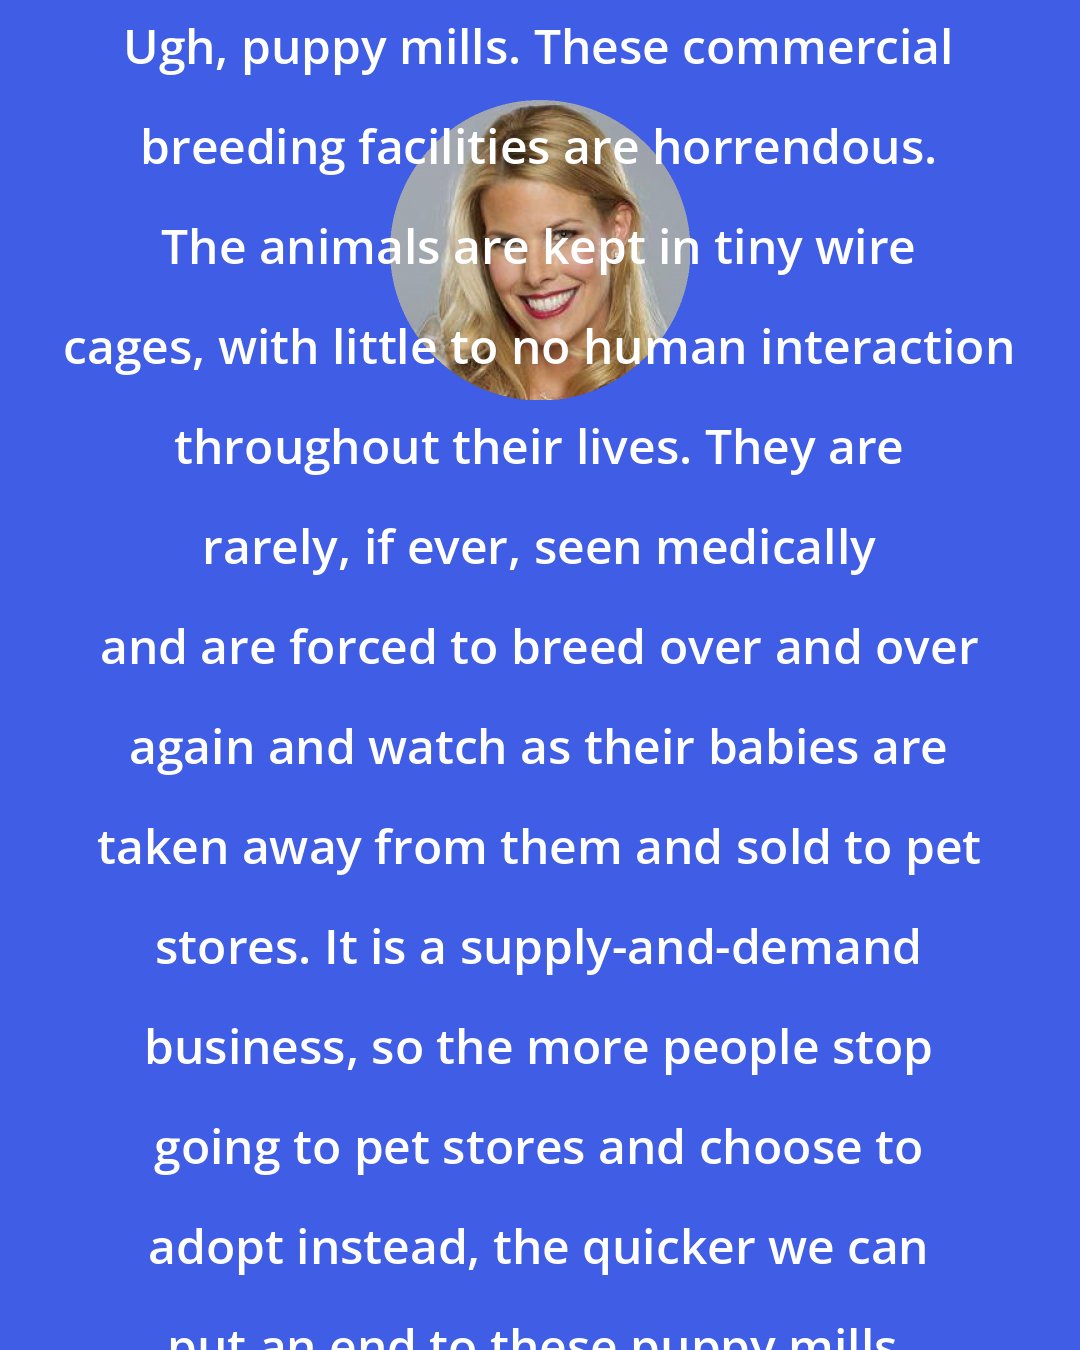 Beth Ostrosky Stern: Ugh, puppy mills. These commercial breeding facilities are horrendous. The animals are kept in tiny wire cages, with little to no human interaction throughout their lives. They are rarely, if ever, seen medically and are forced to breed over and over again and watch as their babies are taken away from them and sold to pet stores. It is a supply-and-demand business, so the more people stop going to pet stores and choose to adopt instead, the quicker we can put an end to these puppy mills.